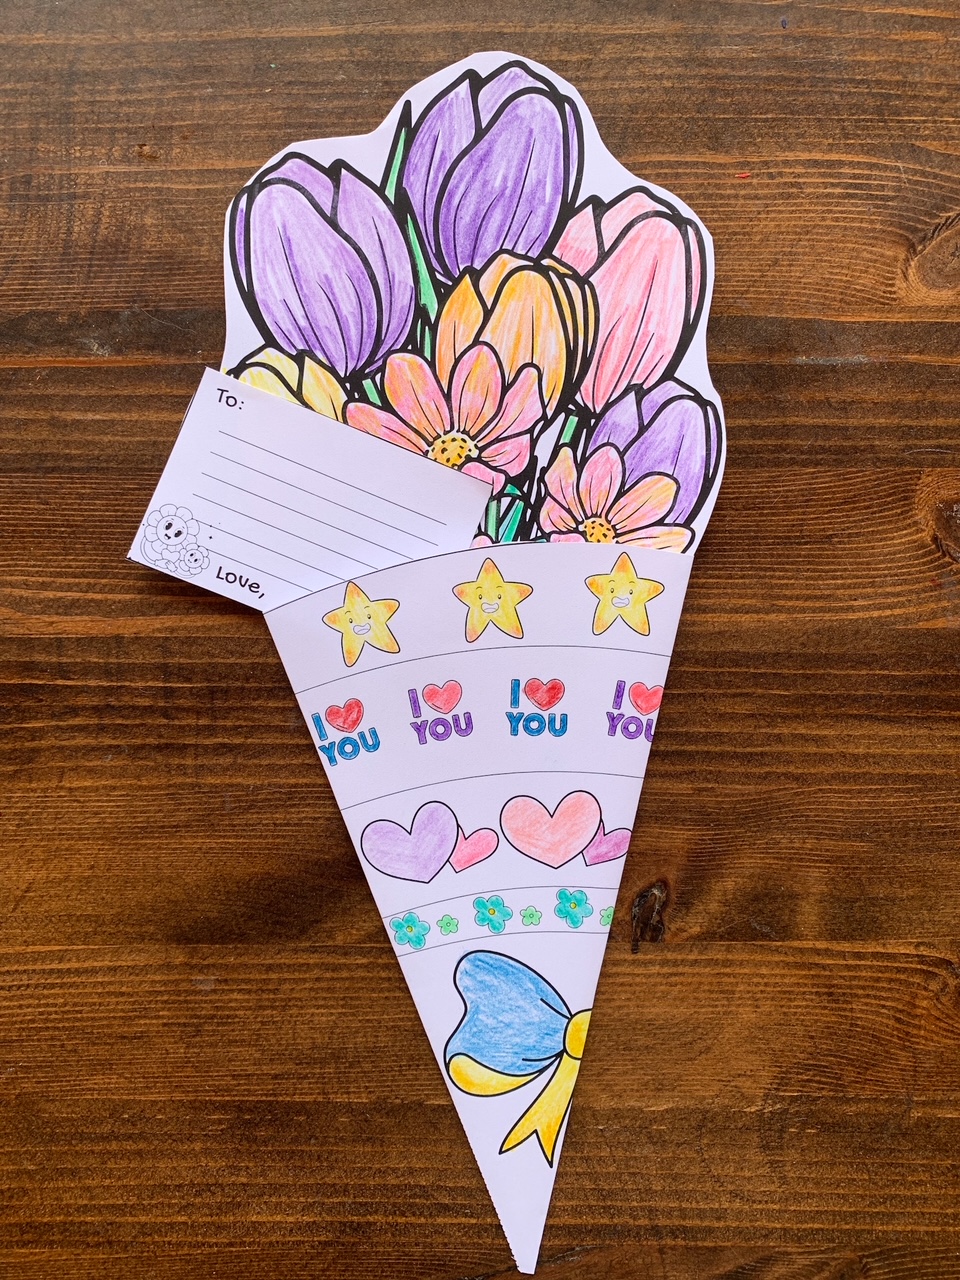 A colored and completed paper flower bouquet card for Mother's Day